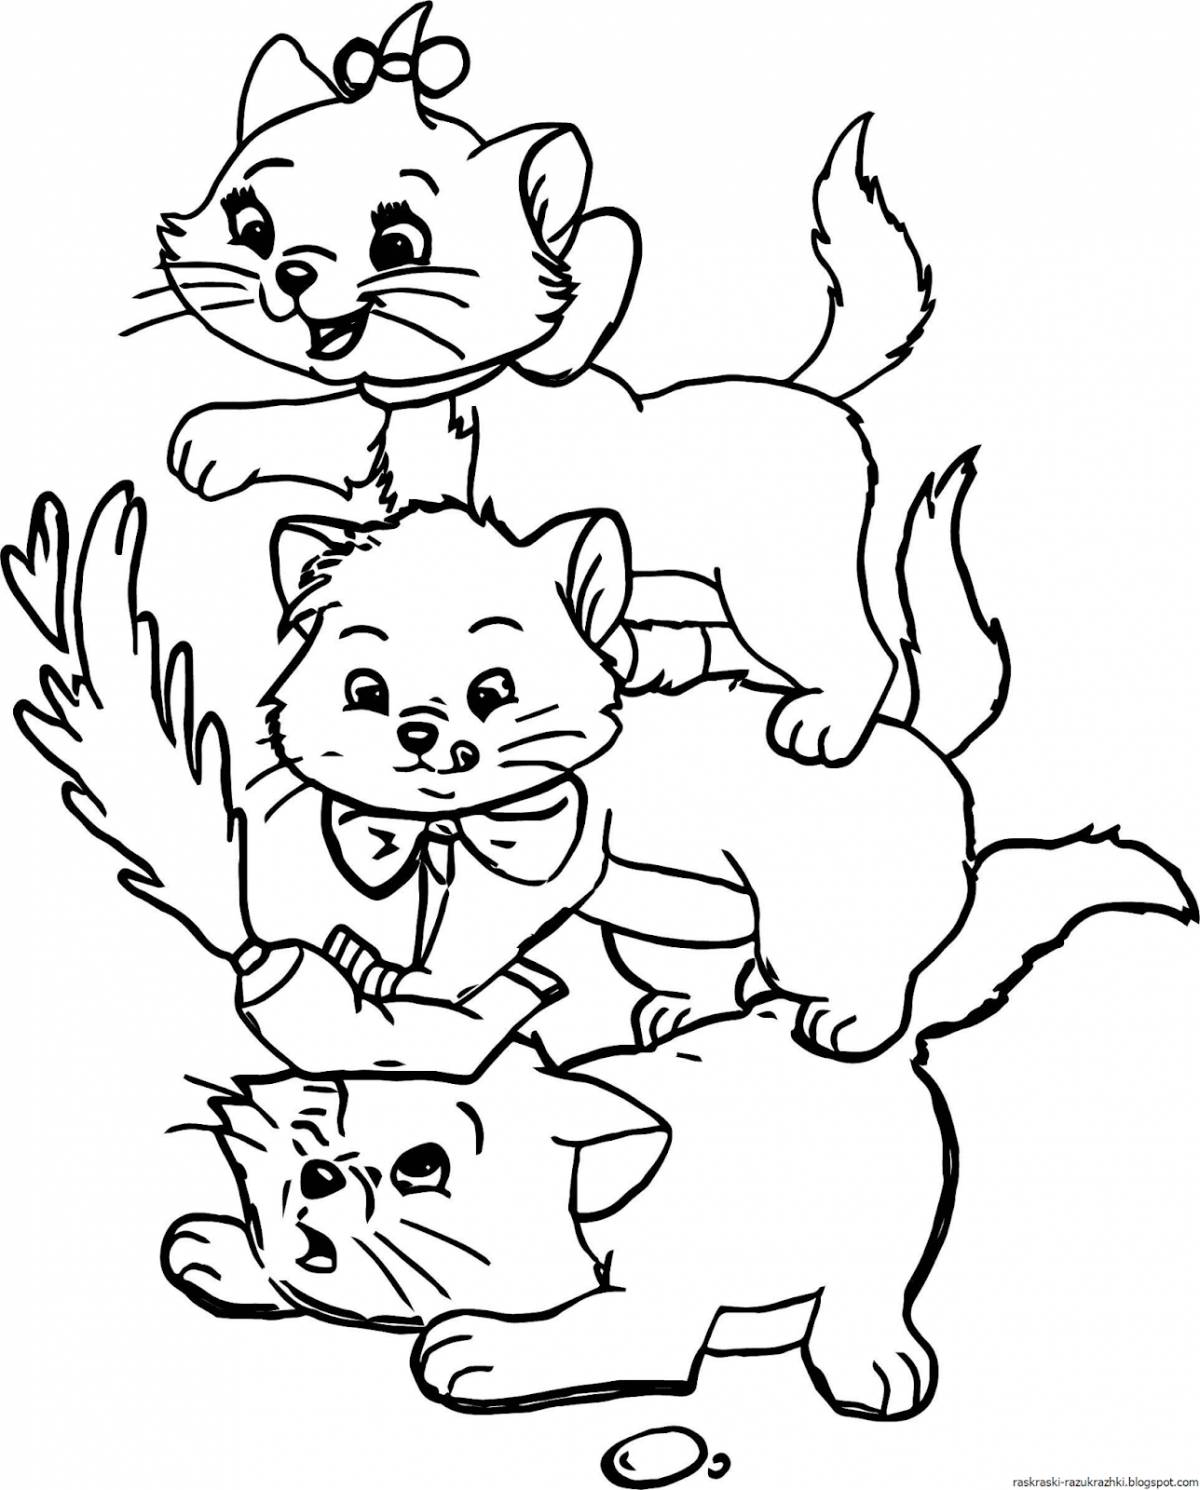 Funny coloring pages for kids